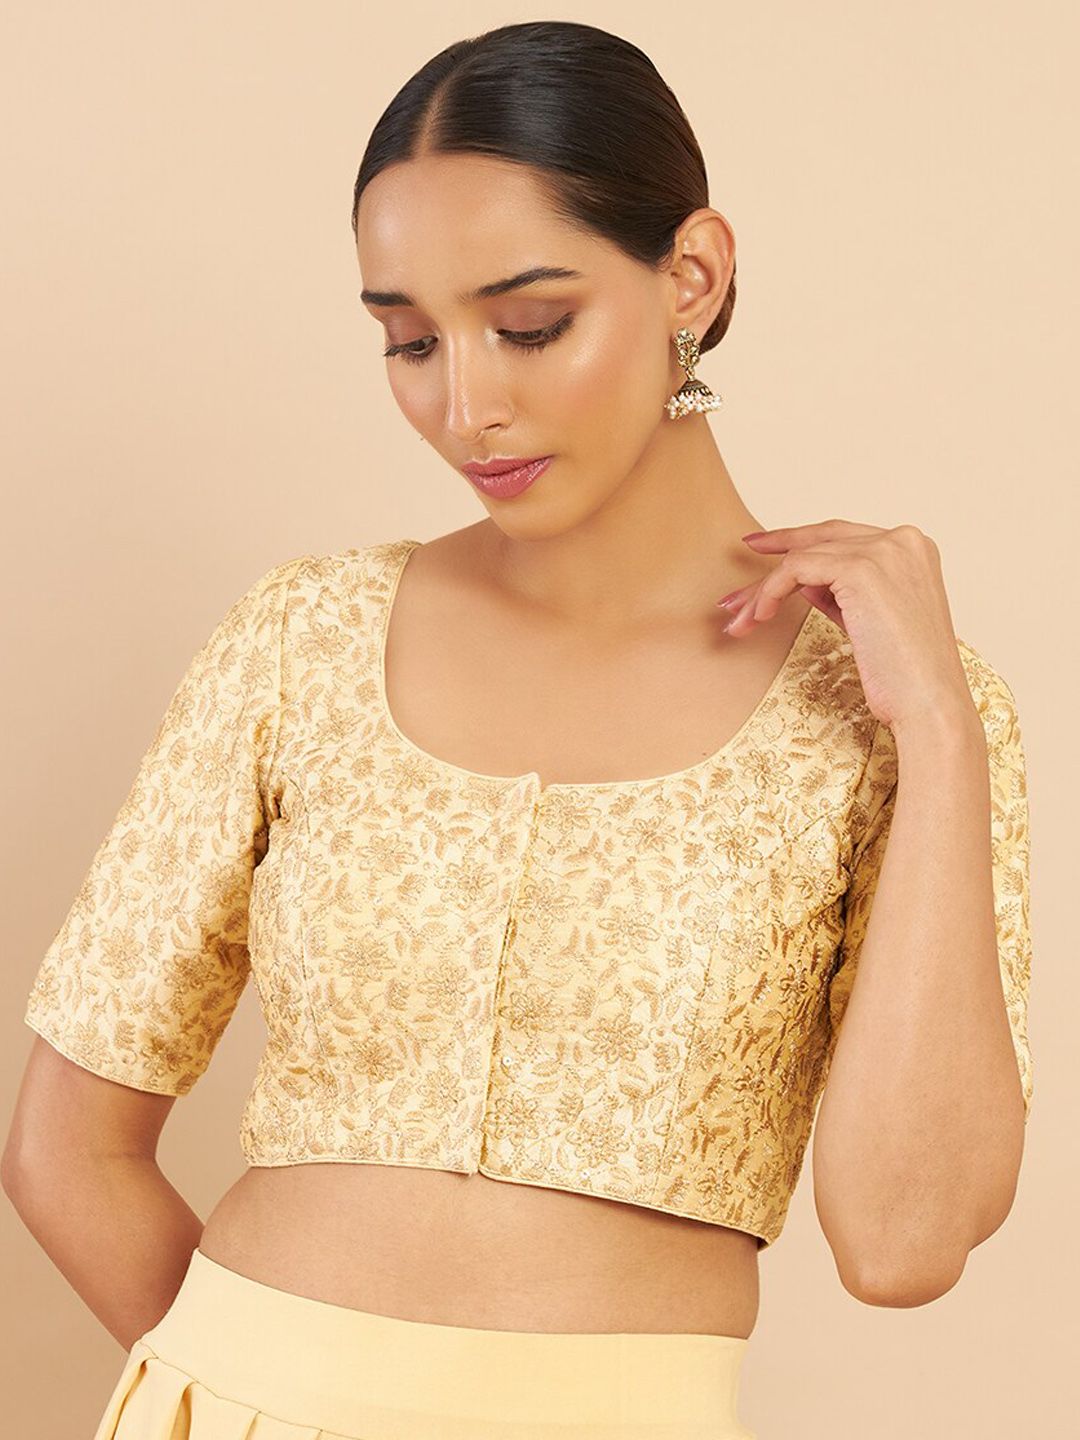 Soch Golden & Cream-Colored Embroidered  Saree Blouse Price in India